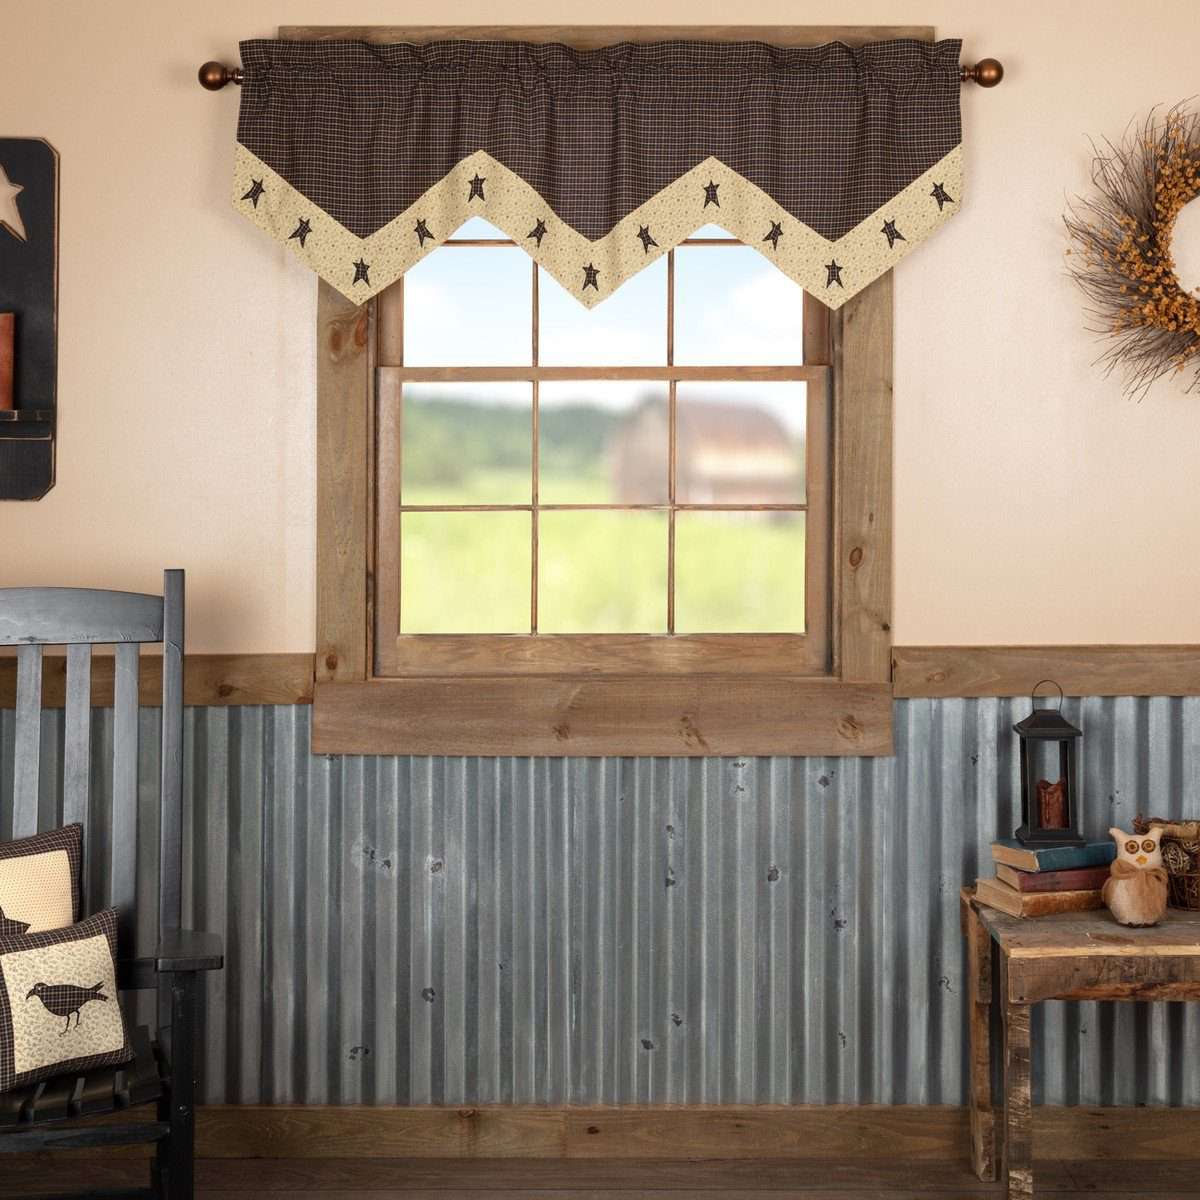 Kettle Grove Star Valance Curtain Country Black VHC Brands - The Fox Decor